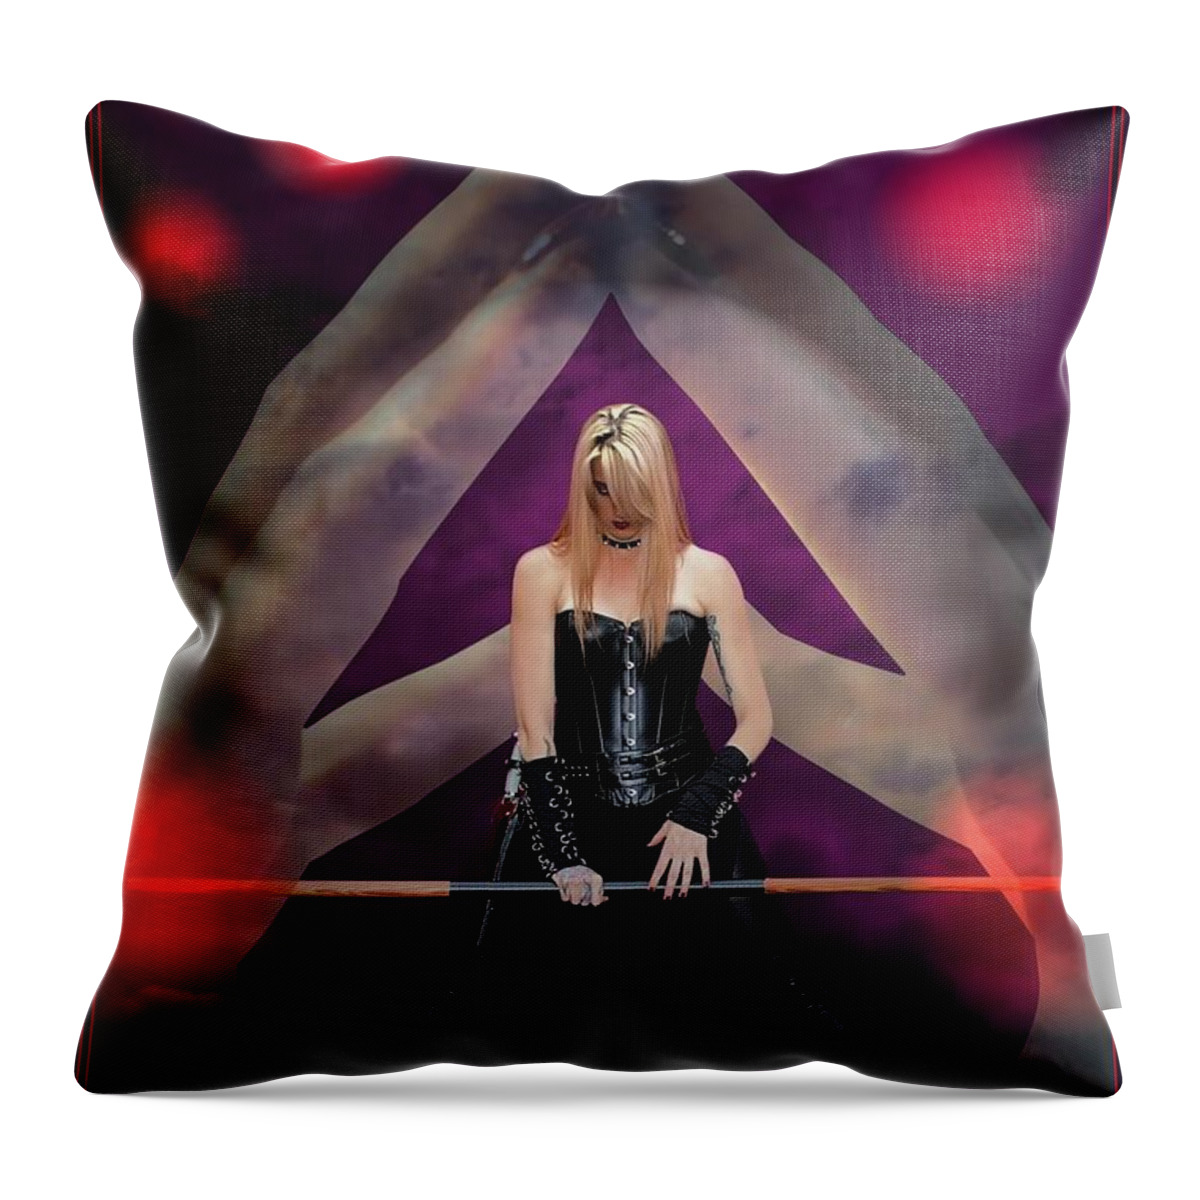 Fantasy Female Throw Pillow featuring the photograph Interposing Hands by Jon Volden